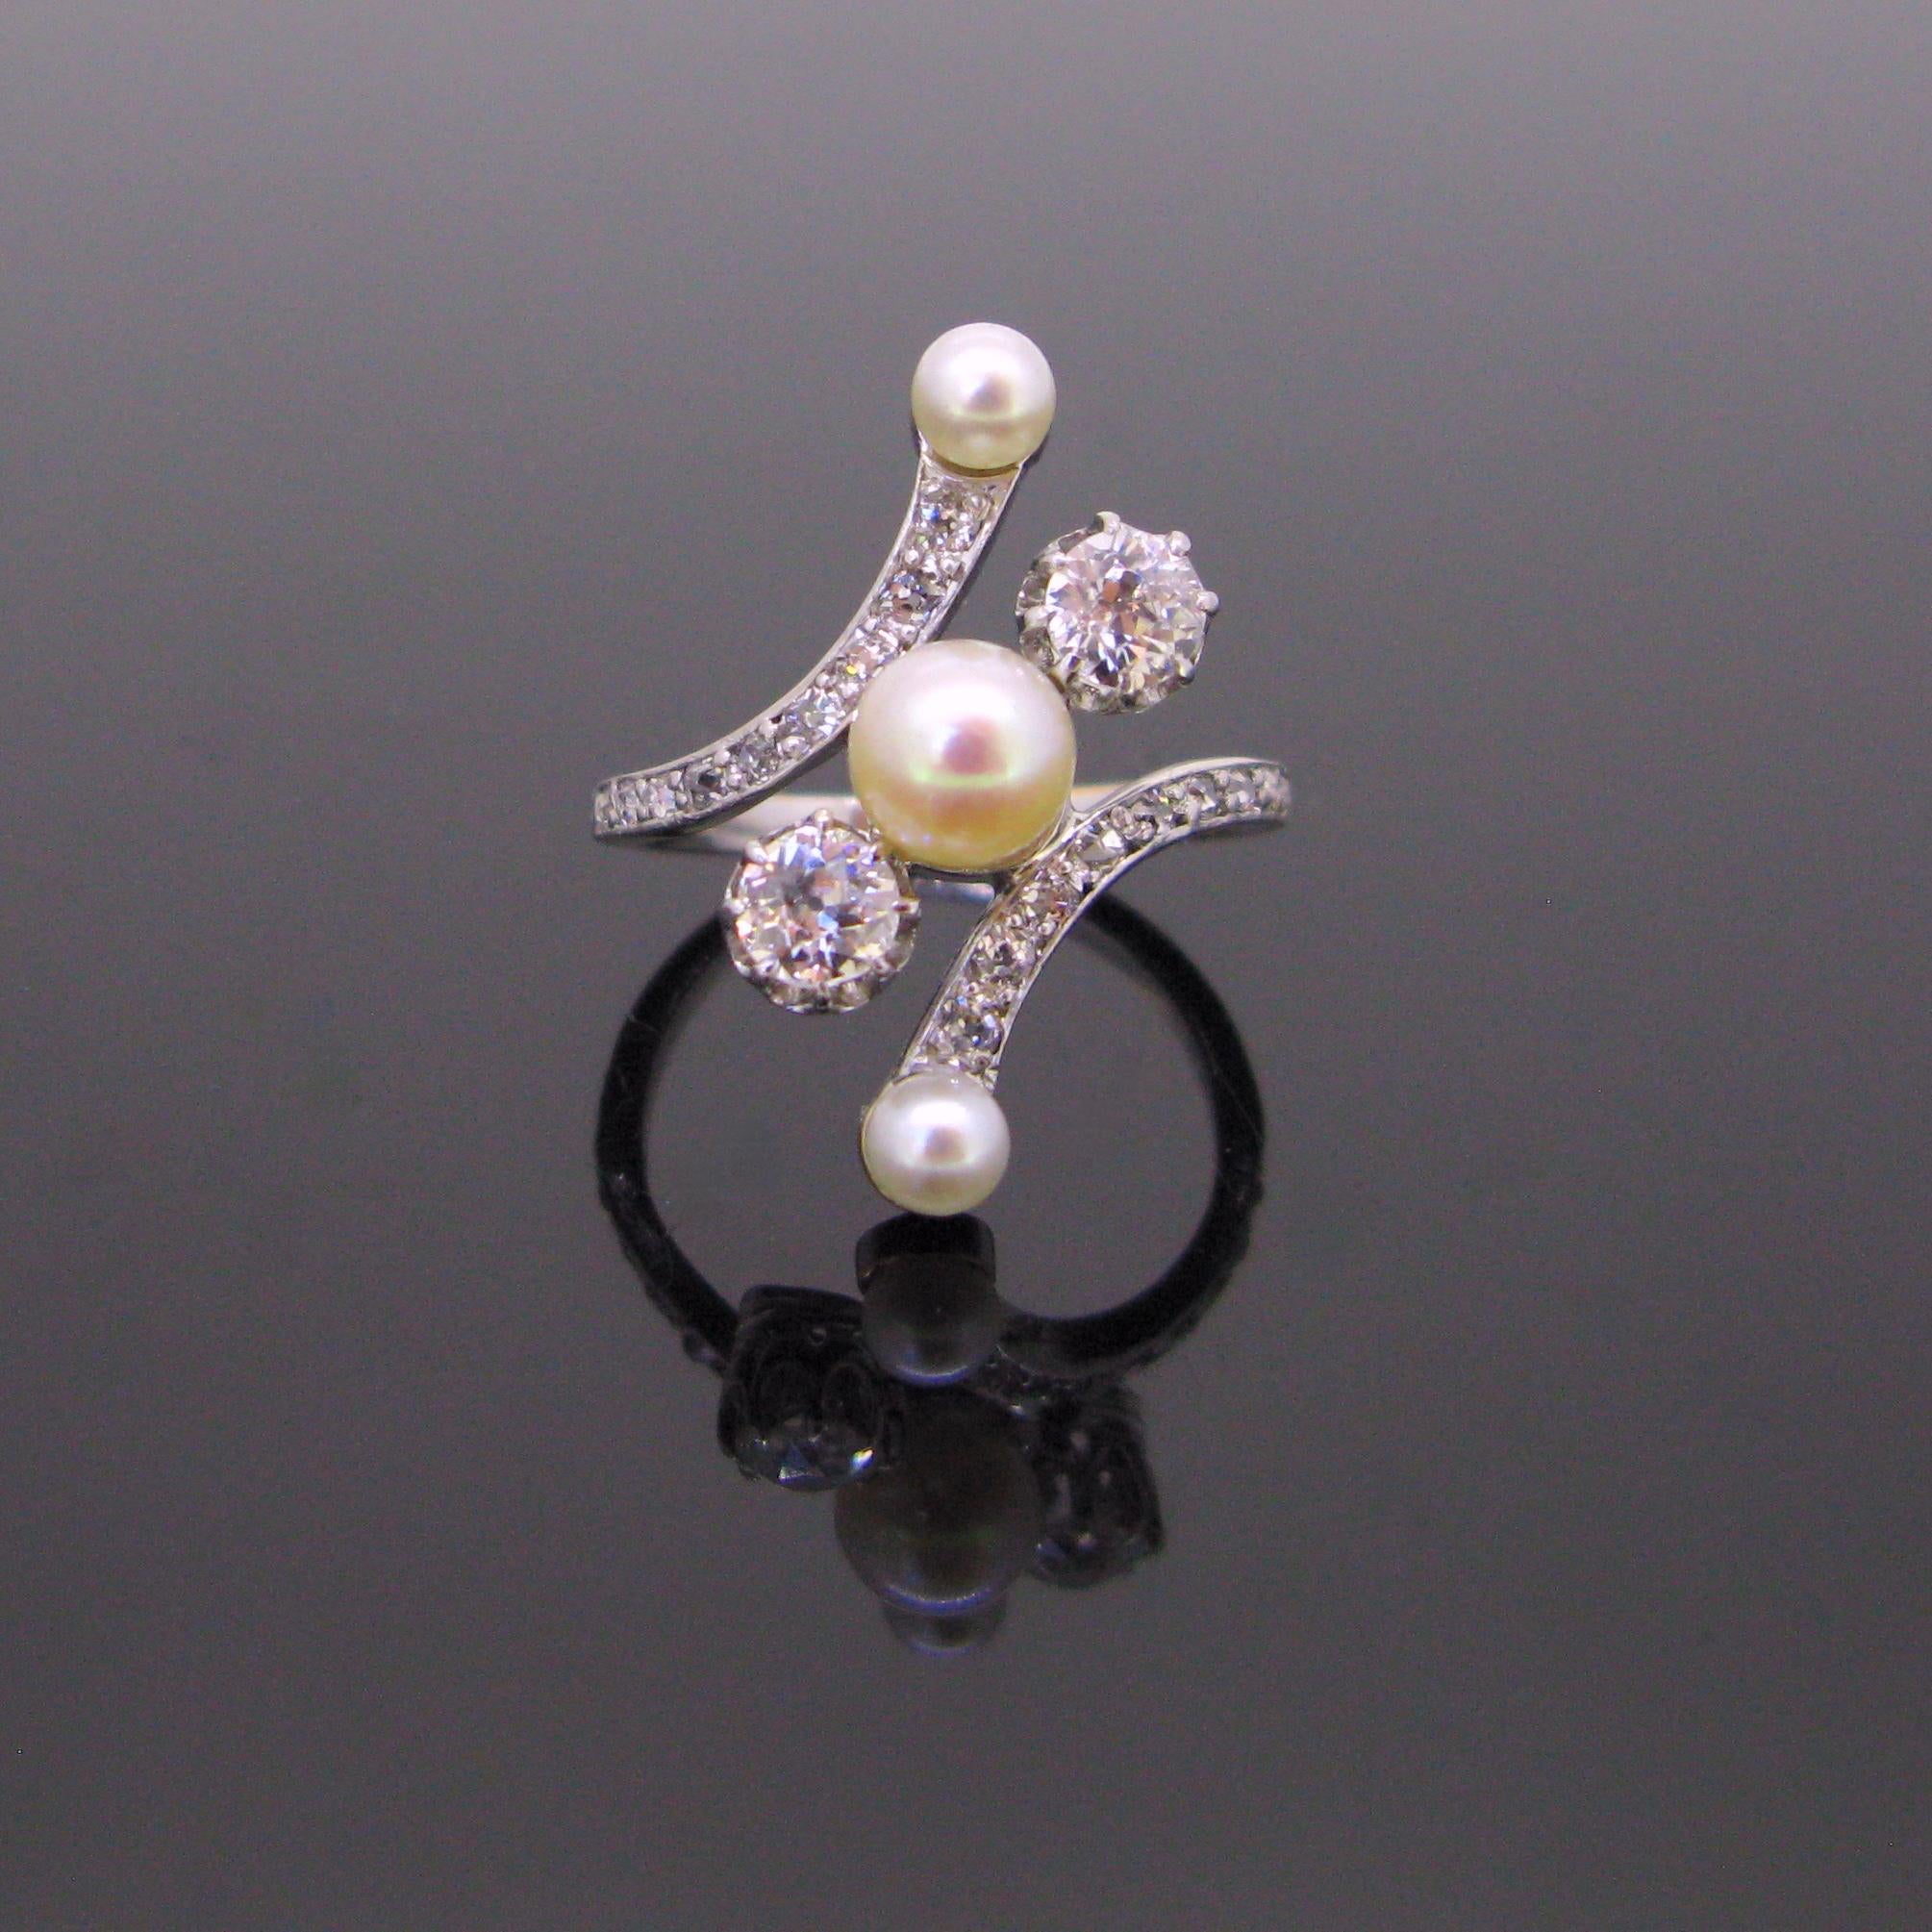  This ring is made in 18kt white gold and platinum. It has a ravishing twisted design. It is set with a natural creamy (with a touch of pink) pearl of 5,79 mm of diameter, and with 2 old mine cut diamonds each weighing approximately 0,30ct. 

The